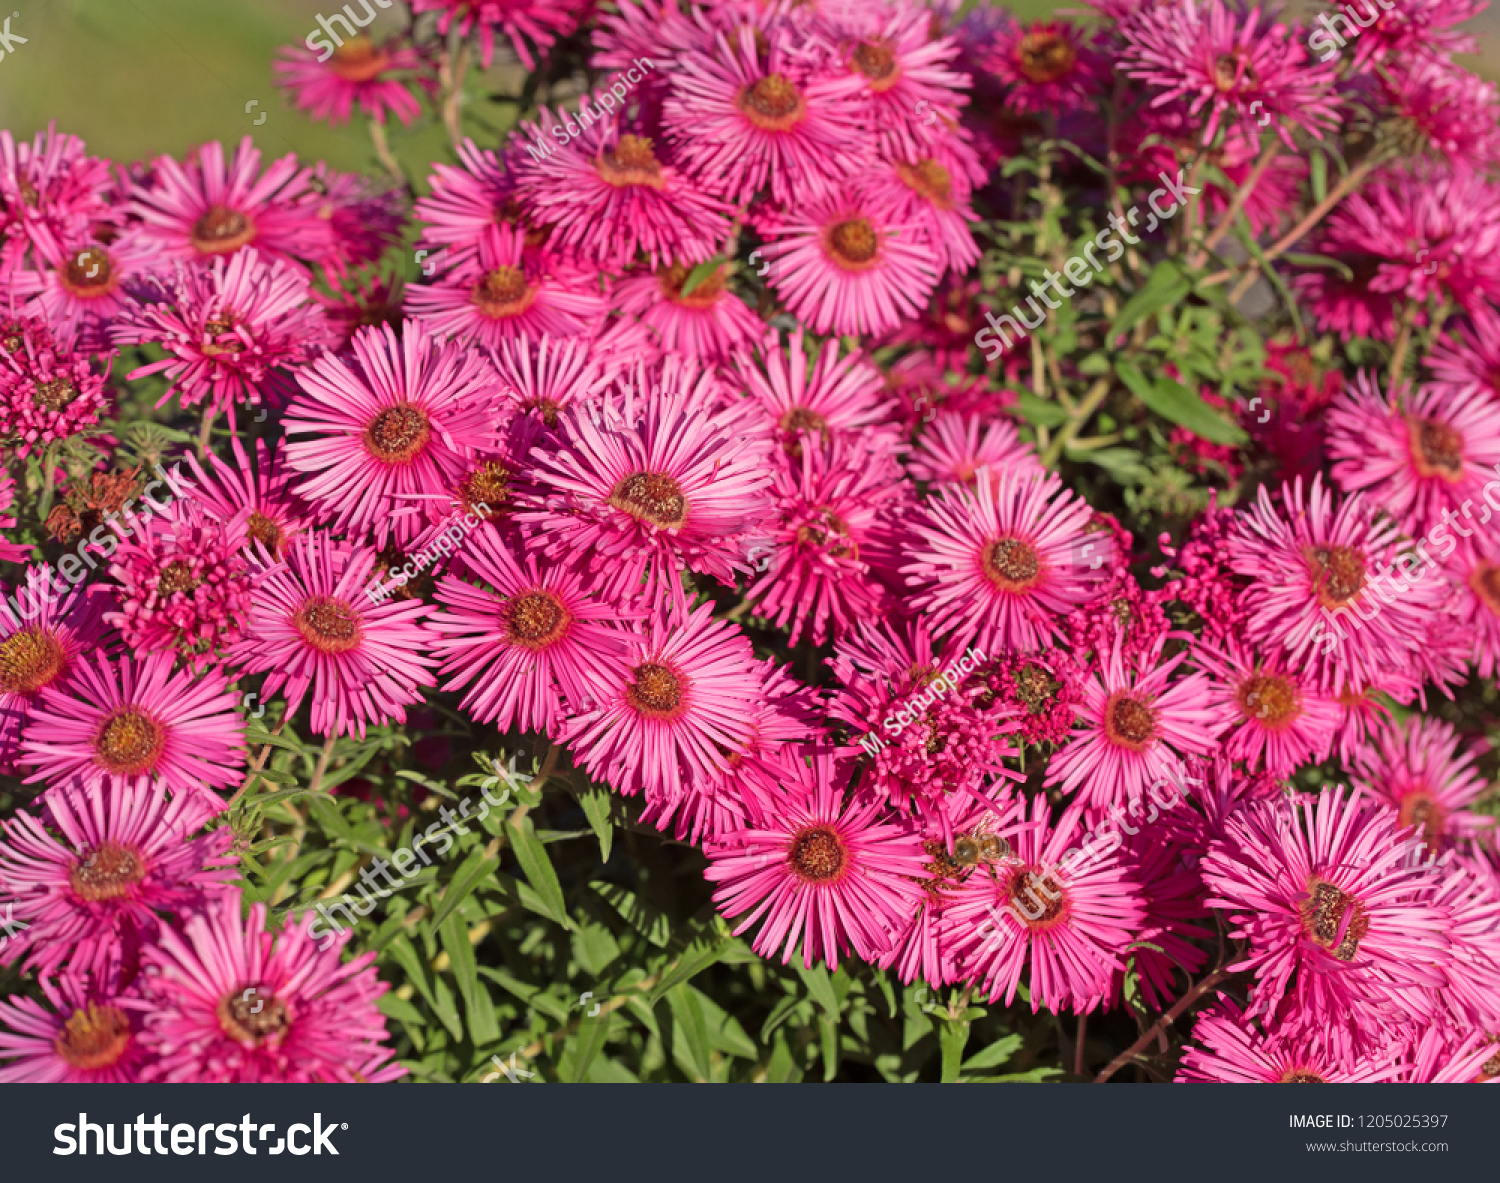 Red Autumn Asters Symphyotrichum Nature Stock Image 1205025397